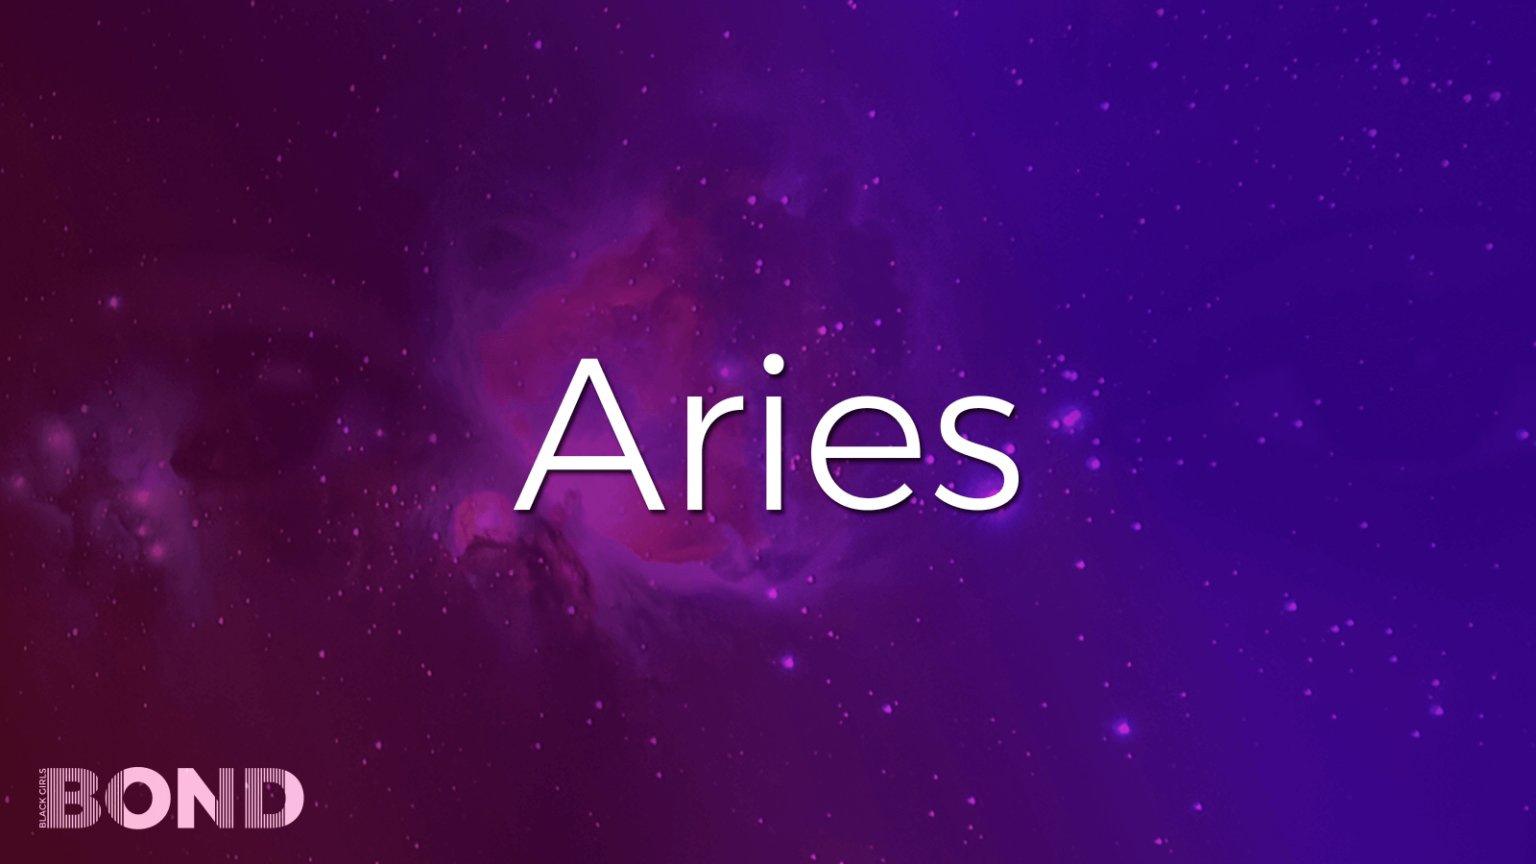 Aries Horoscope & Astrological Sign